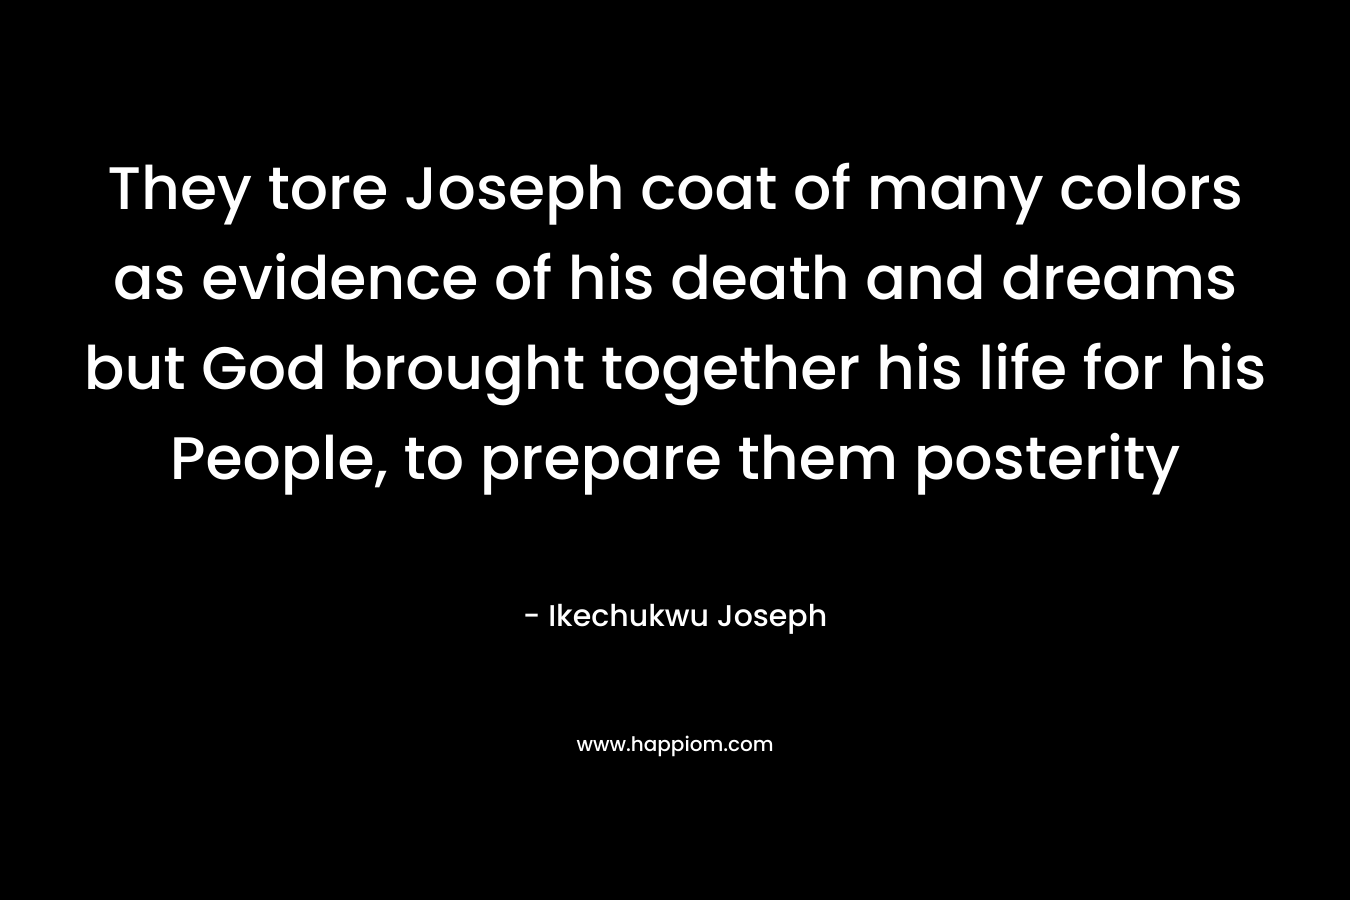 They tore Joseph coat of many colors as evidence of his death and dreams but God brought together his life for his People, to prepare them posterity